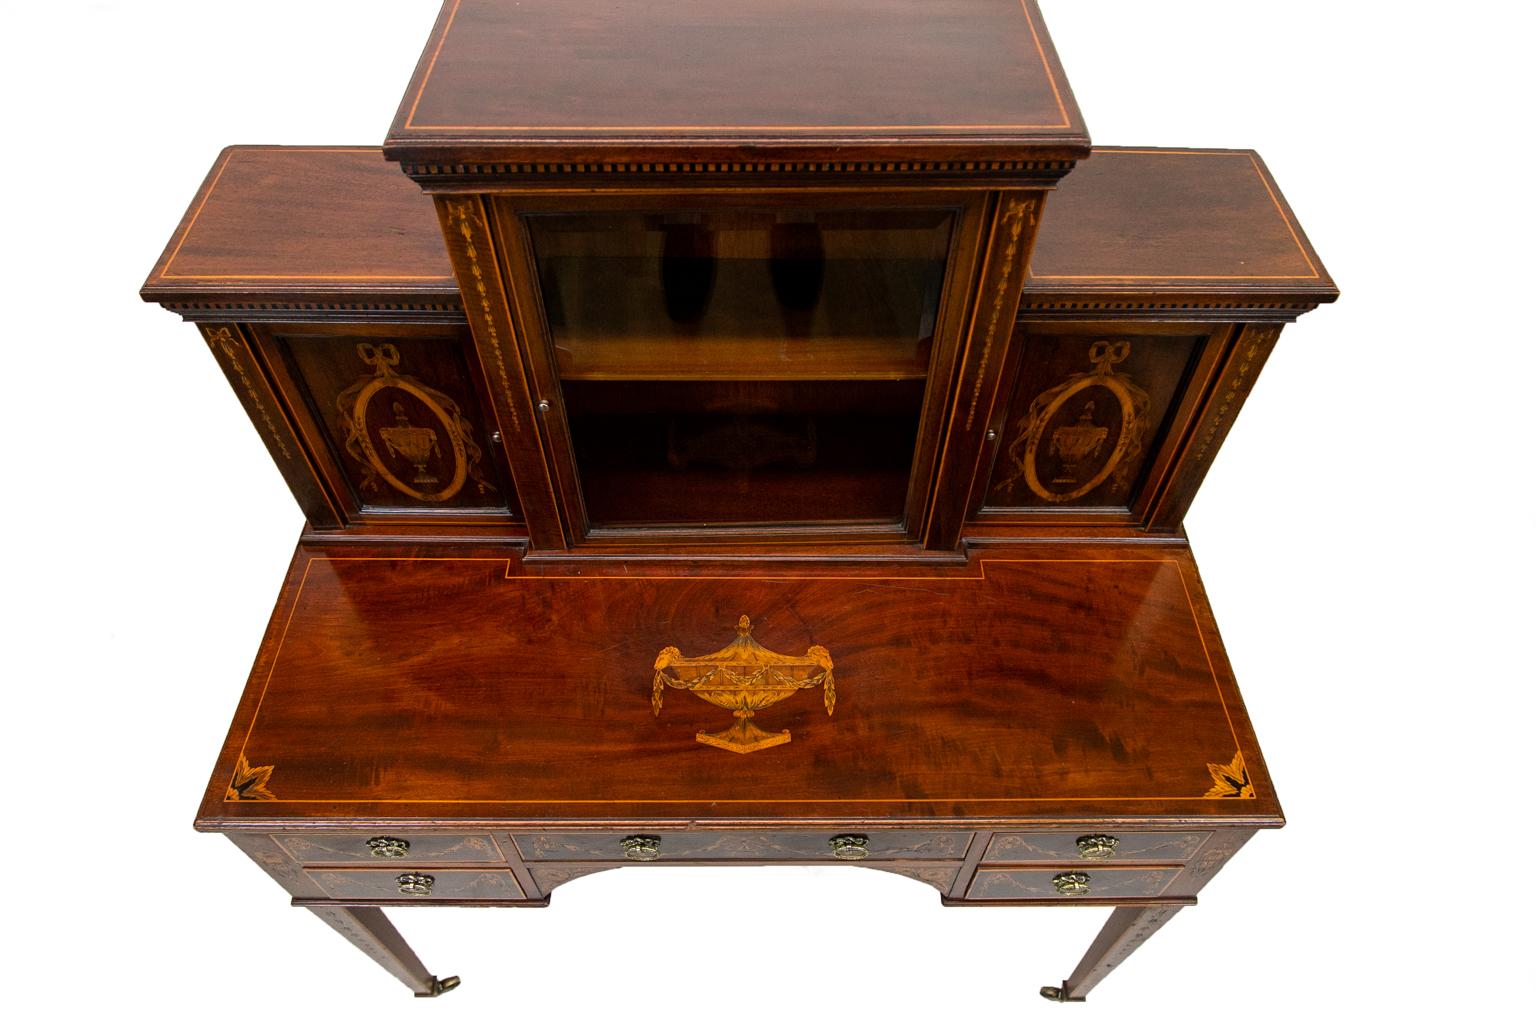 This ladies desk is intricately inlaid with classical urns, draped ribbons and bellflowers on the stiles and legs. There is boxwood line inlay on the top, drawers, legs, and sides. The center cabinet has a beveled glass door with molded framing. The